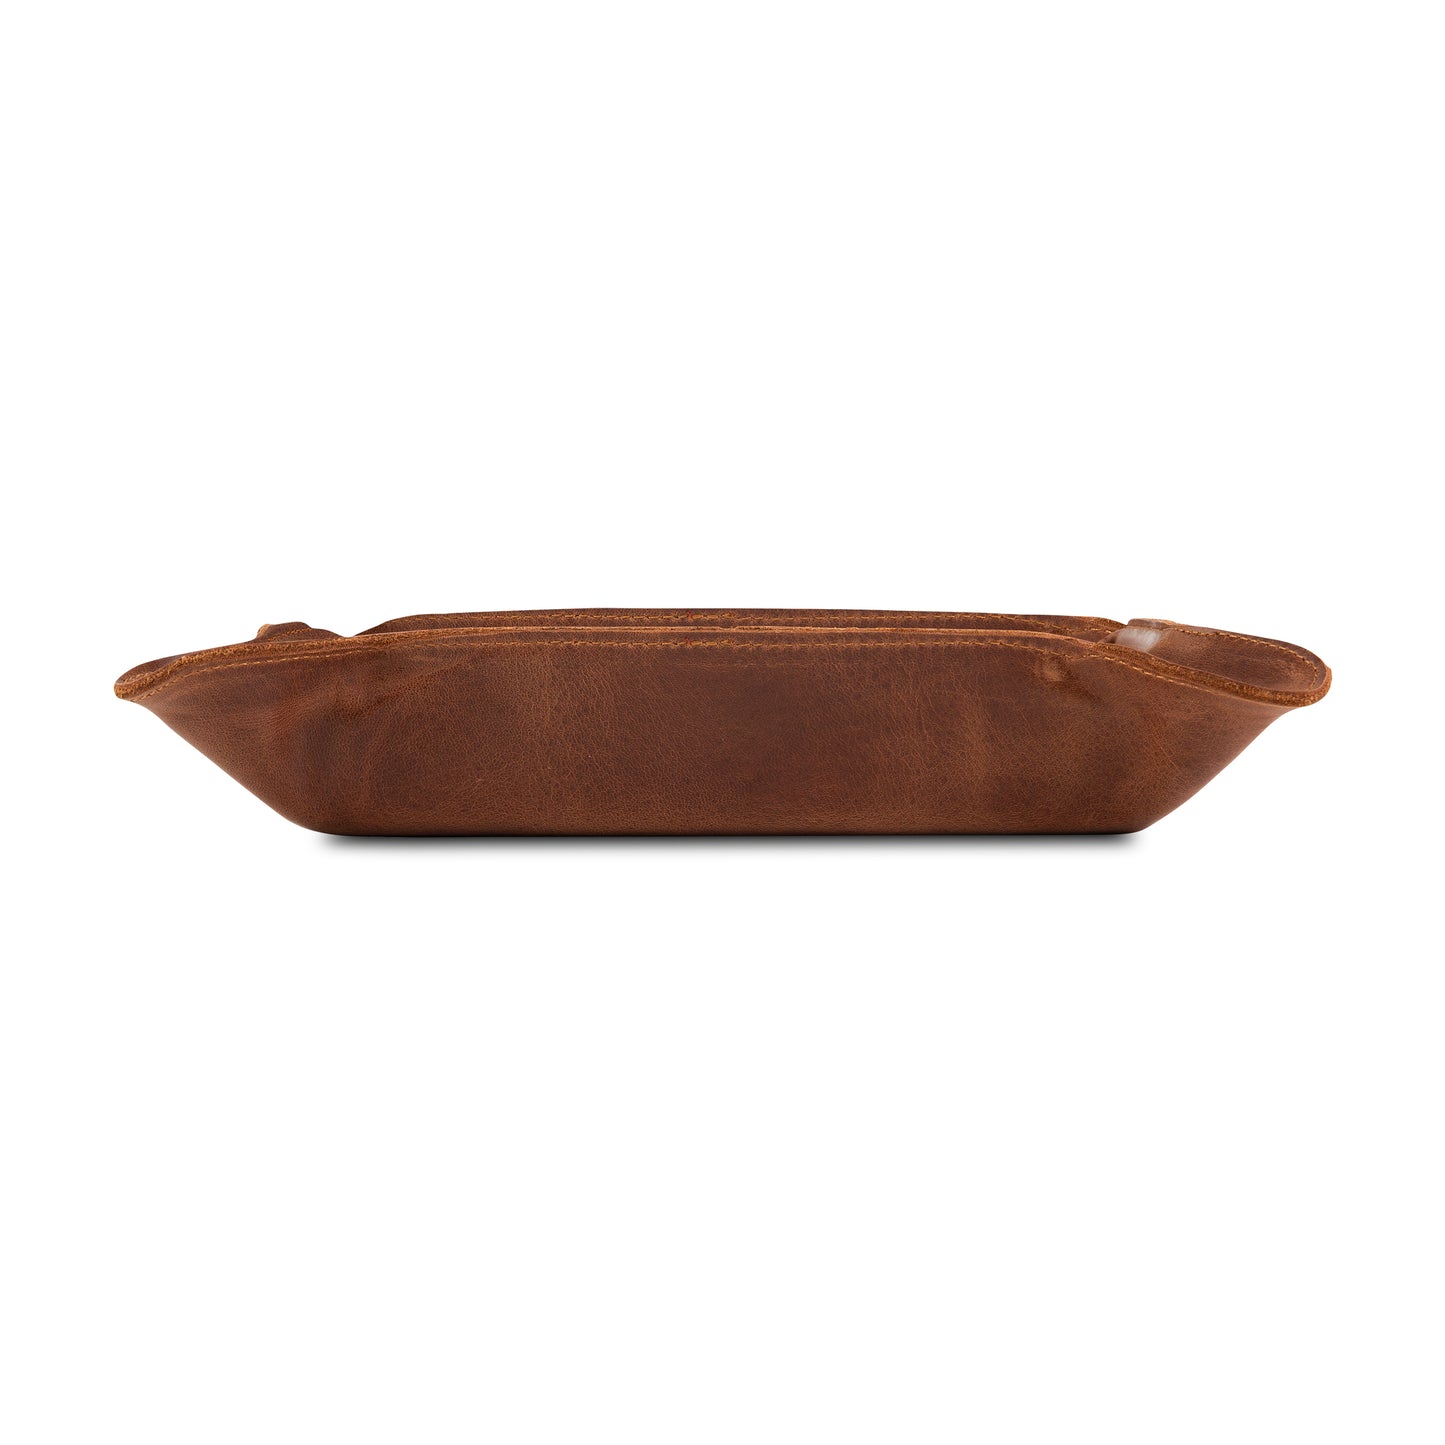 Full Leather Ashtray - Villiger Collab